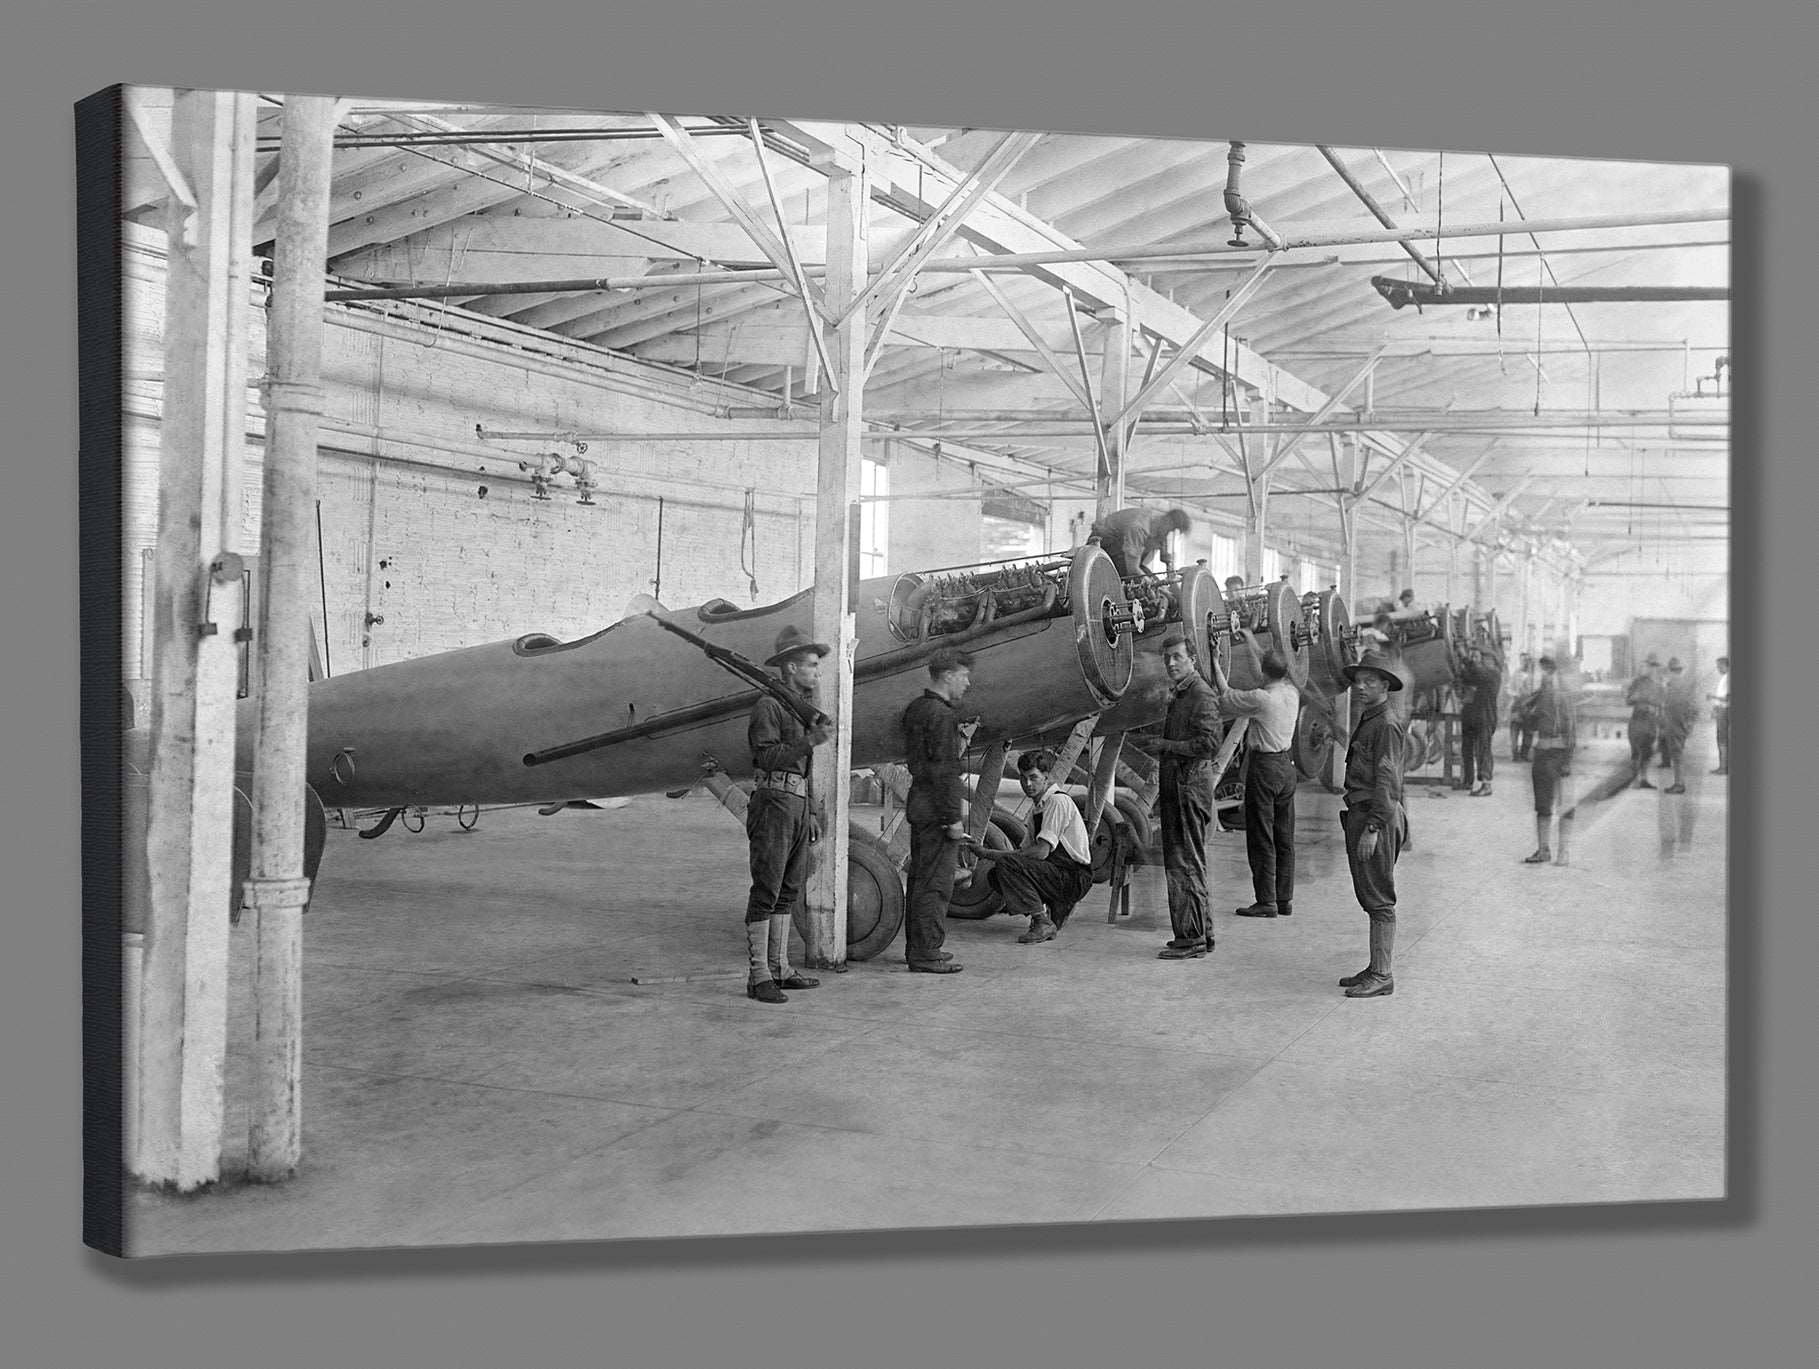 A canvas print reproduction of a photograph of College Point's Plane Shop